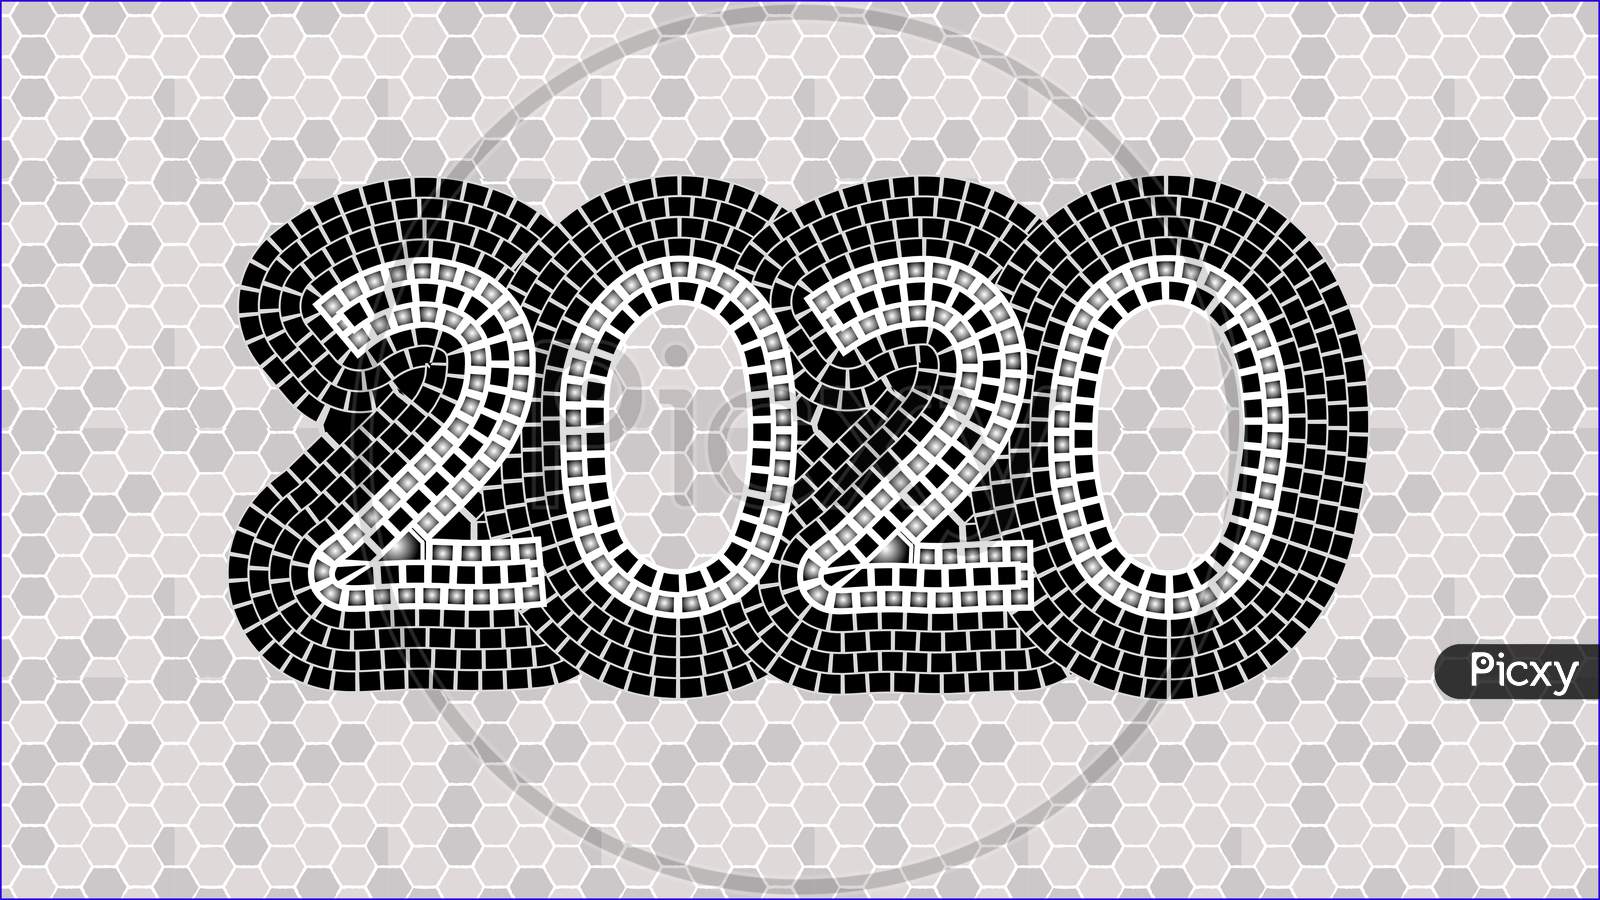 2020 Typography On A Mosaic Background.